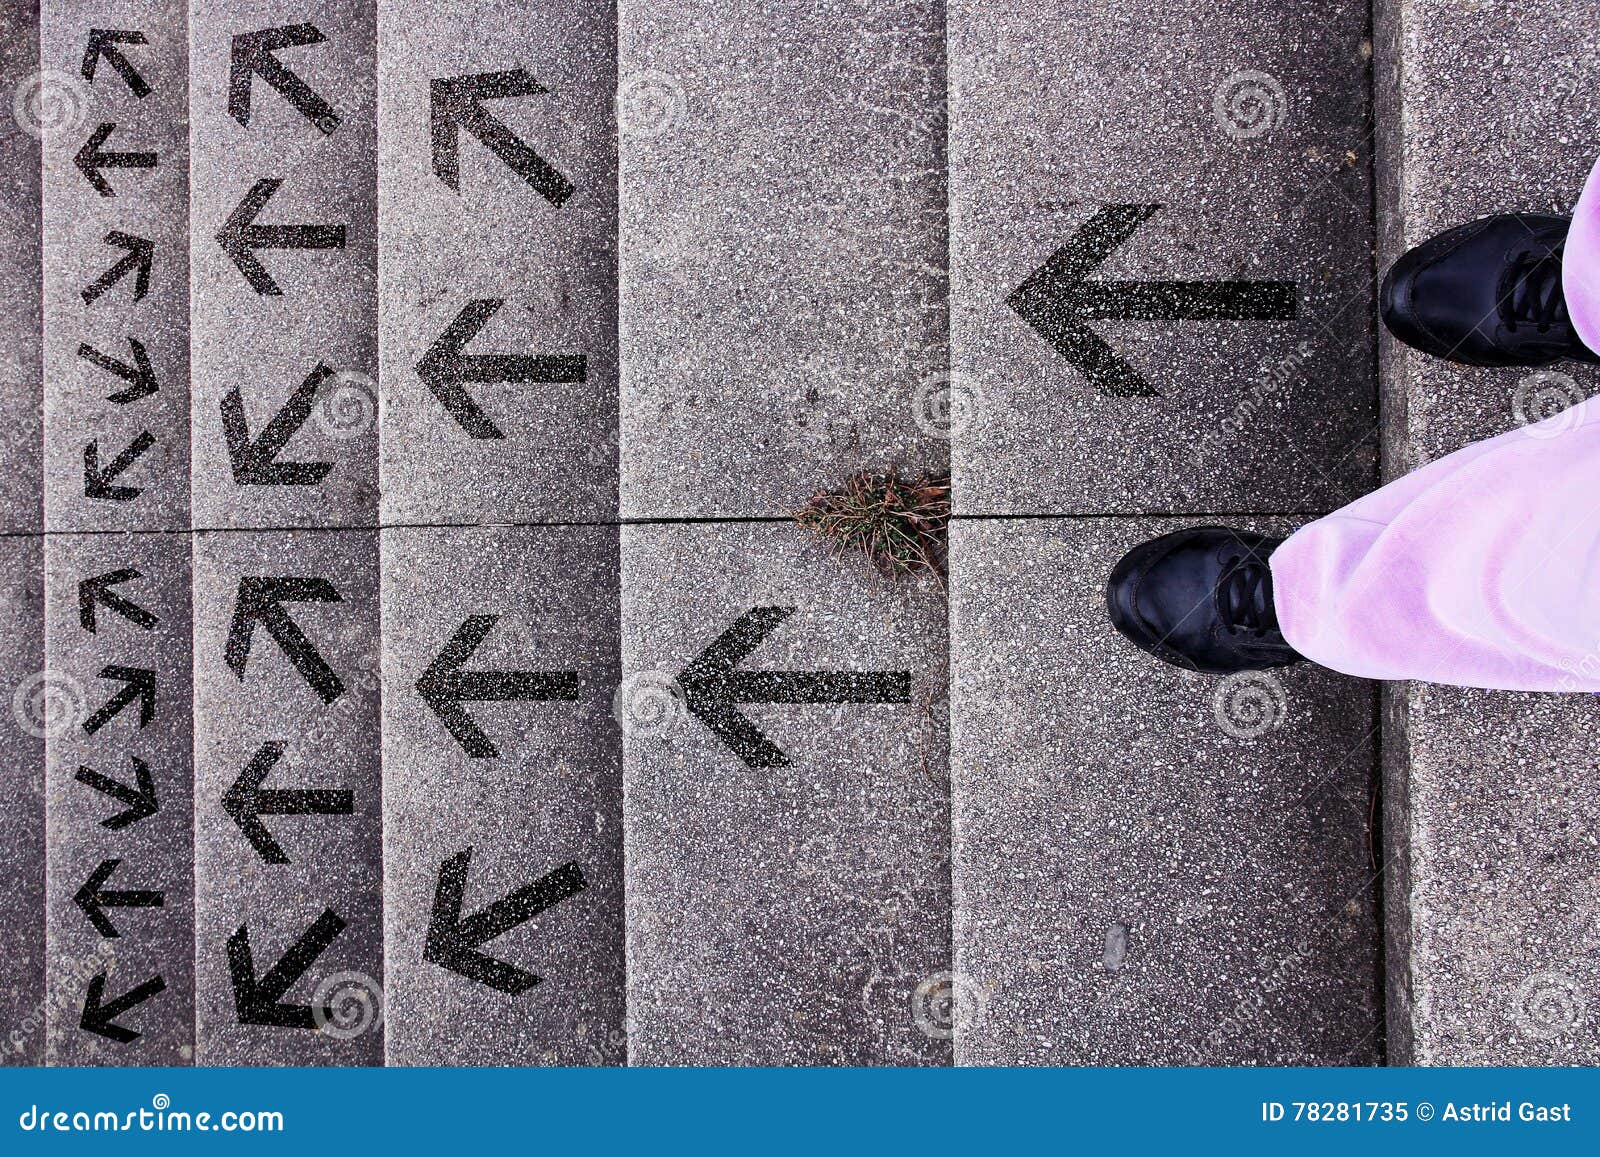 decision - which way to go?